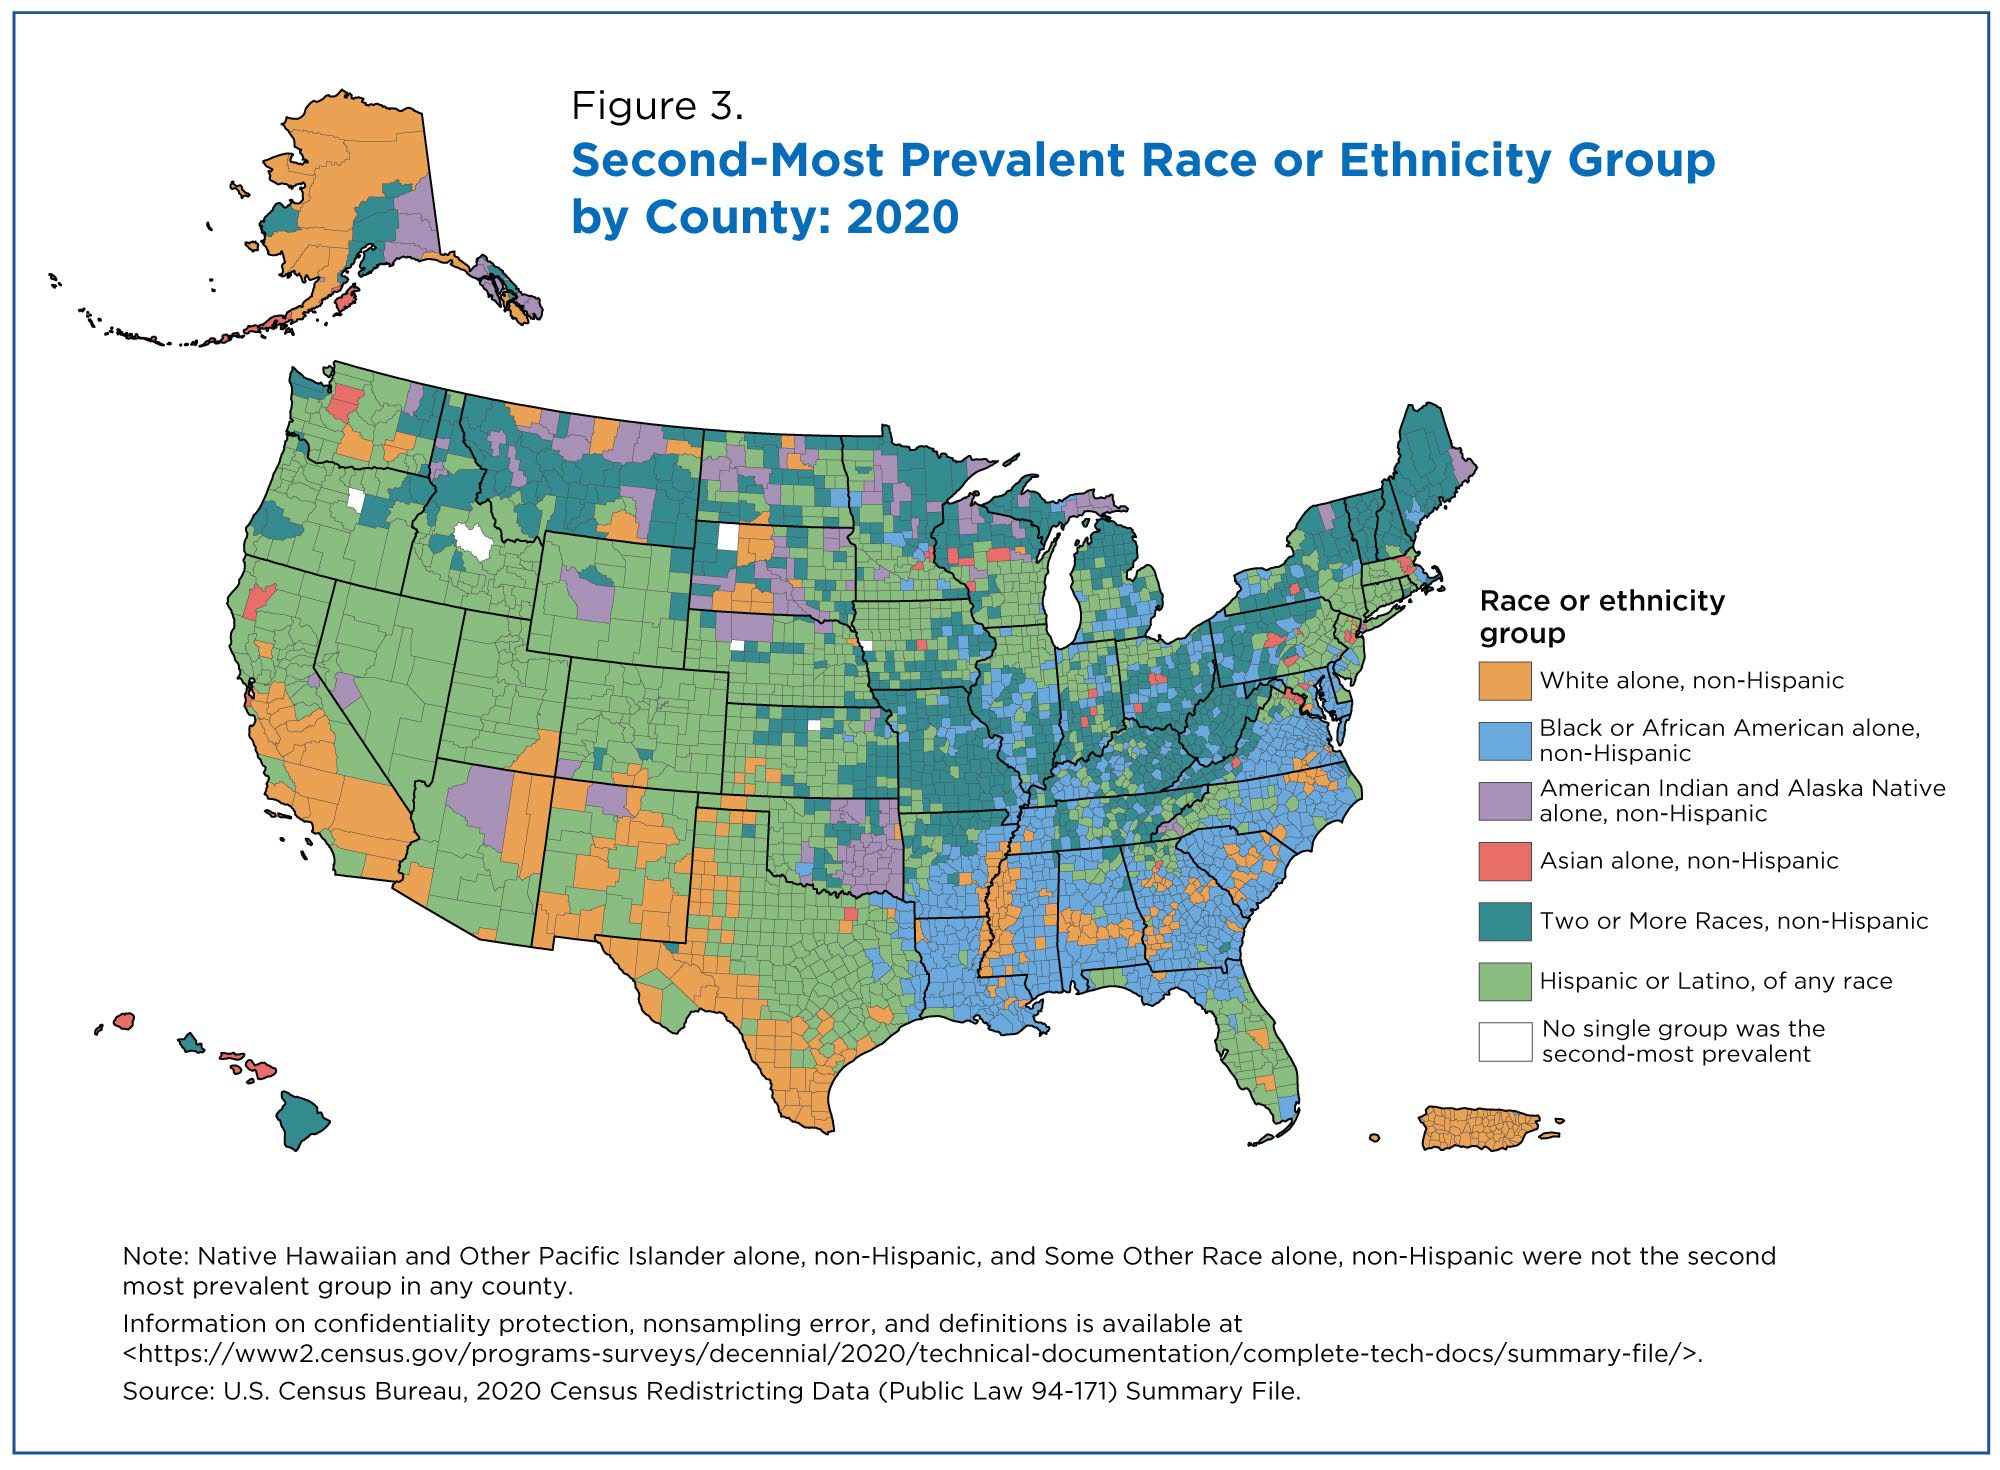 https://www.census.gov/content/dam/Census/library/stories/2021/08/2020-united-states-population-more-racially-ethnically-diverse-than-2010-figure-3.jpg